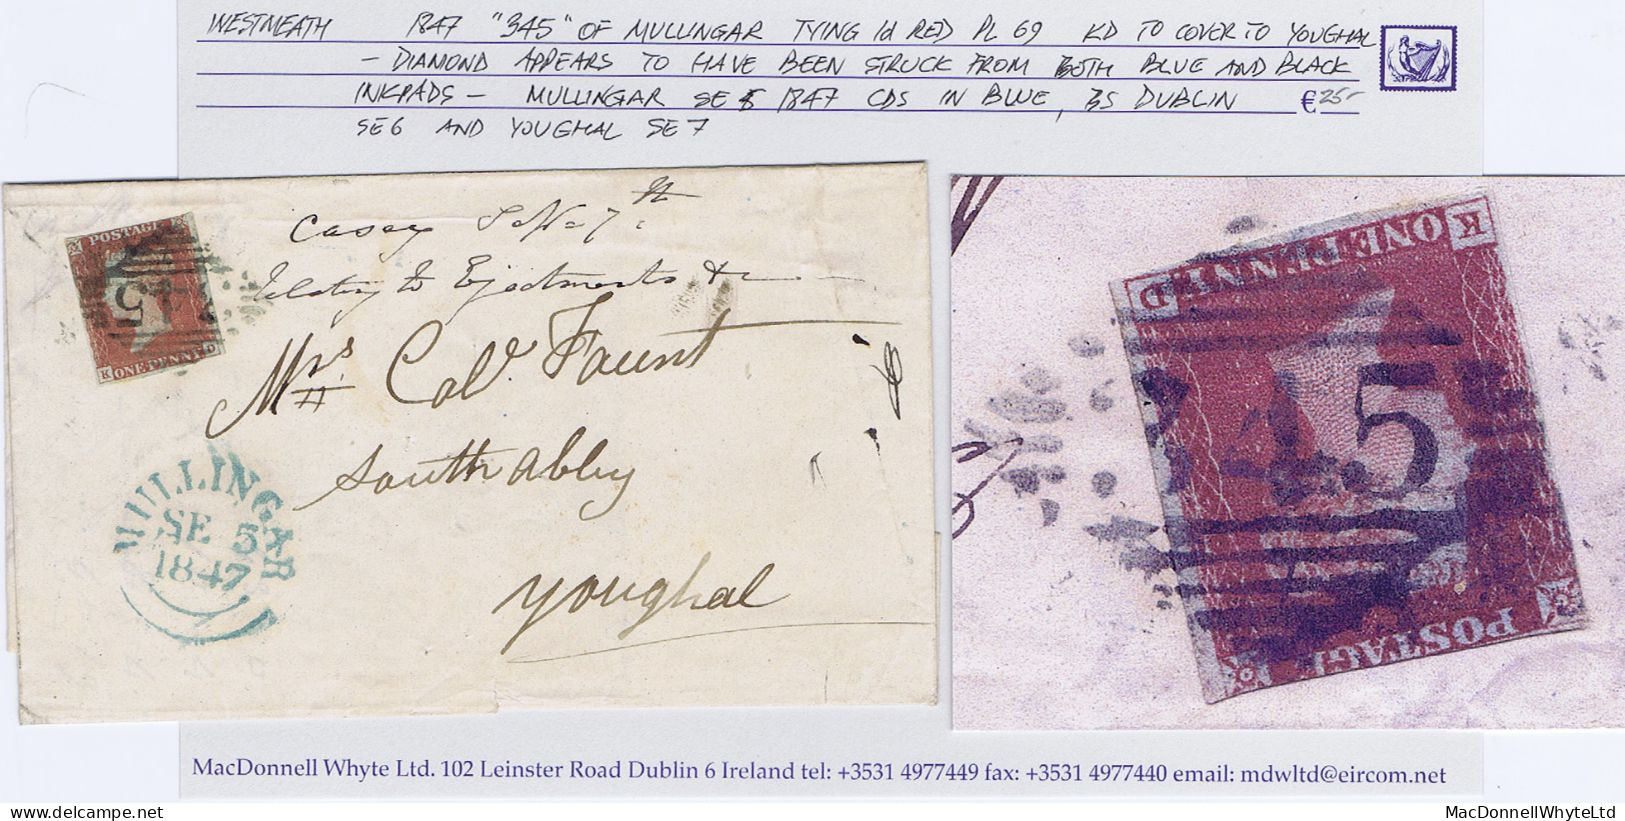 Ireland Westmeath 1847 Cover To Youghal With 1d Red Plate 69 KD Tied By "345" Of Mullingar, Green MULLINGAR SE 5 1847 Be - Préphilatélie